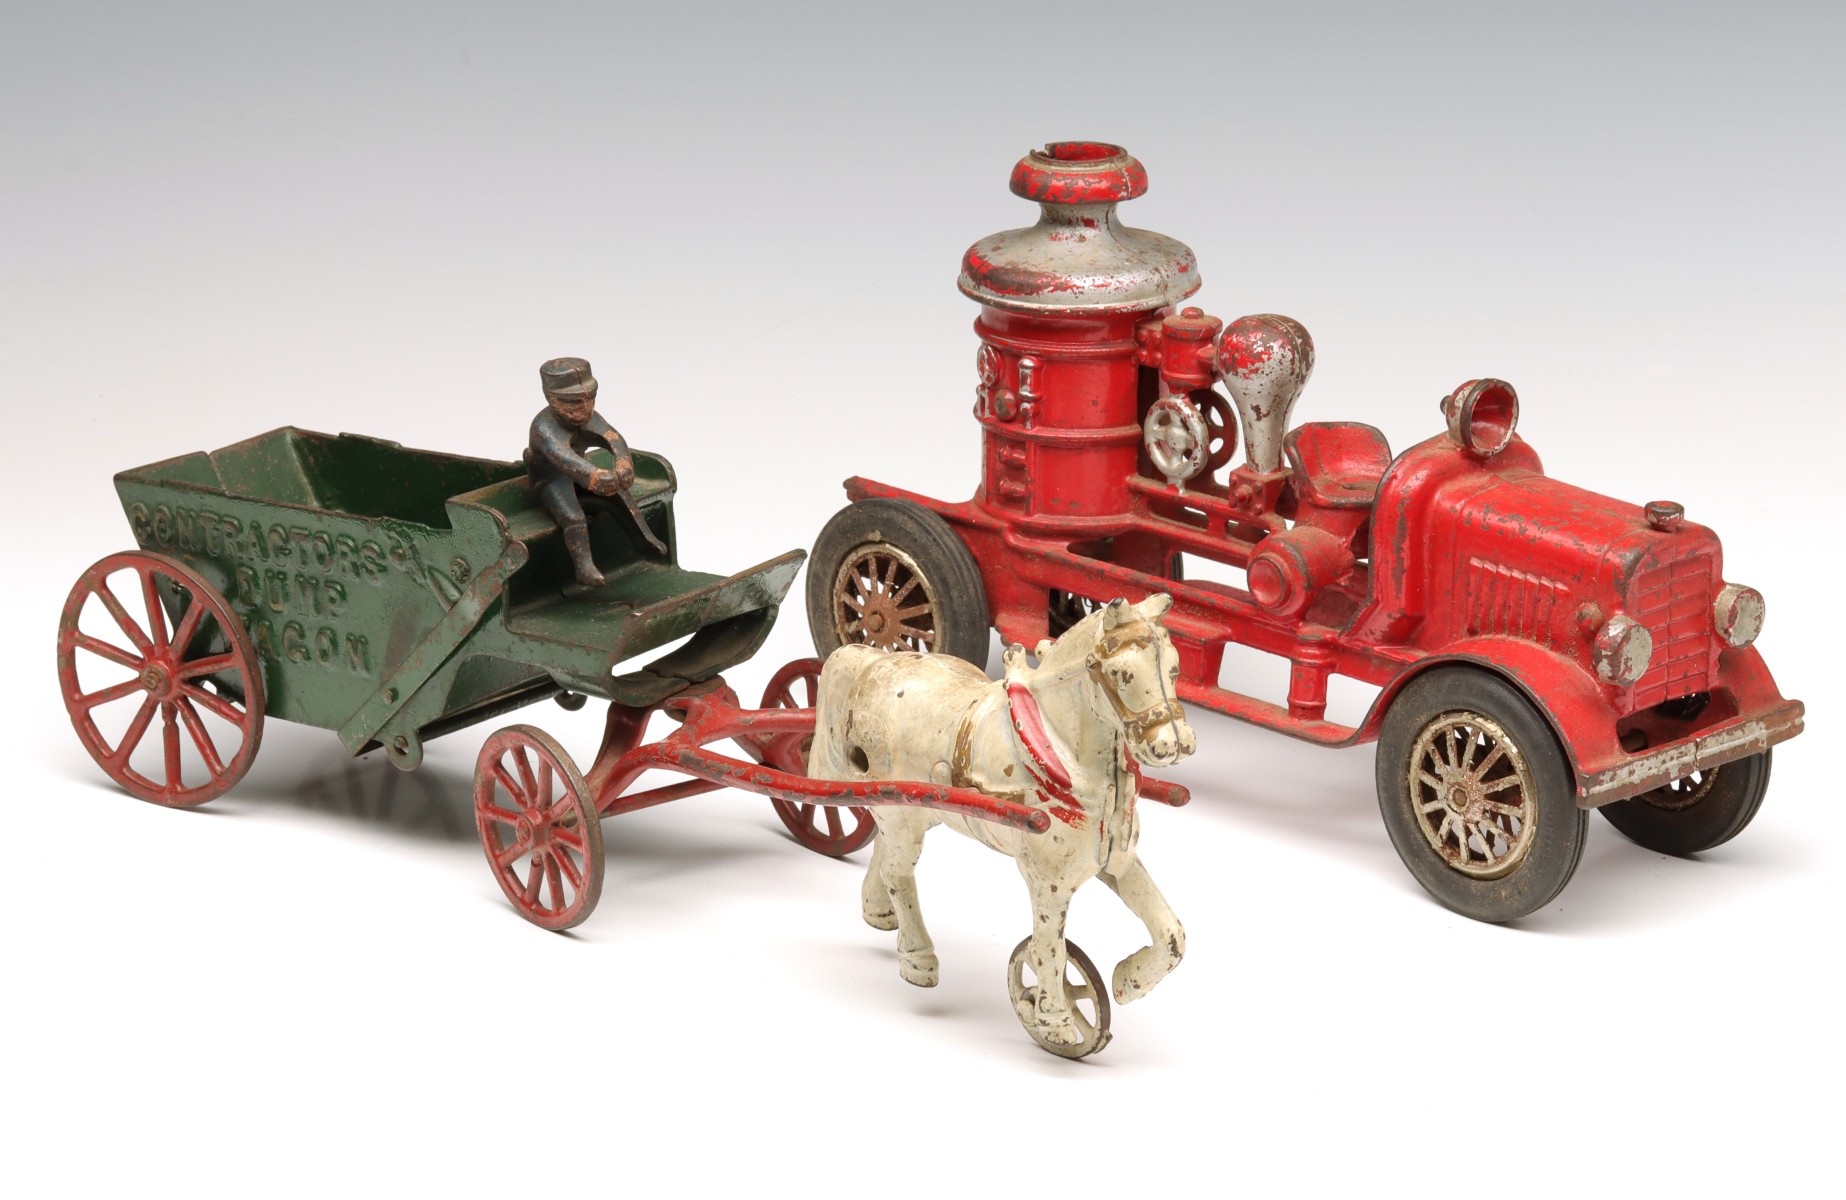 CAST IRON FIRE TRUCK AND HORSE DRAWN TOY